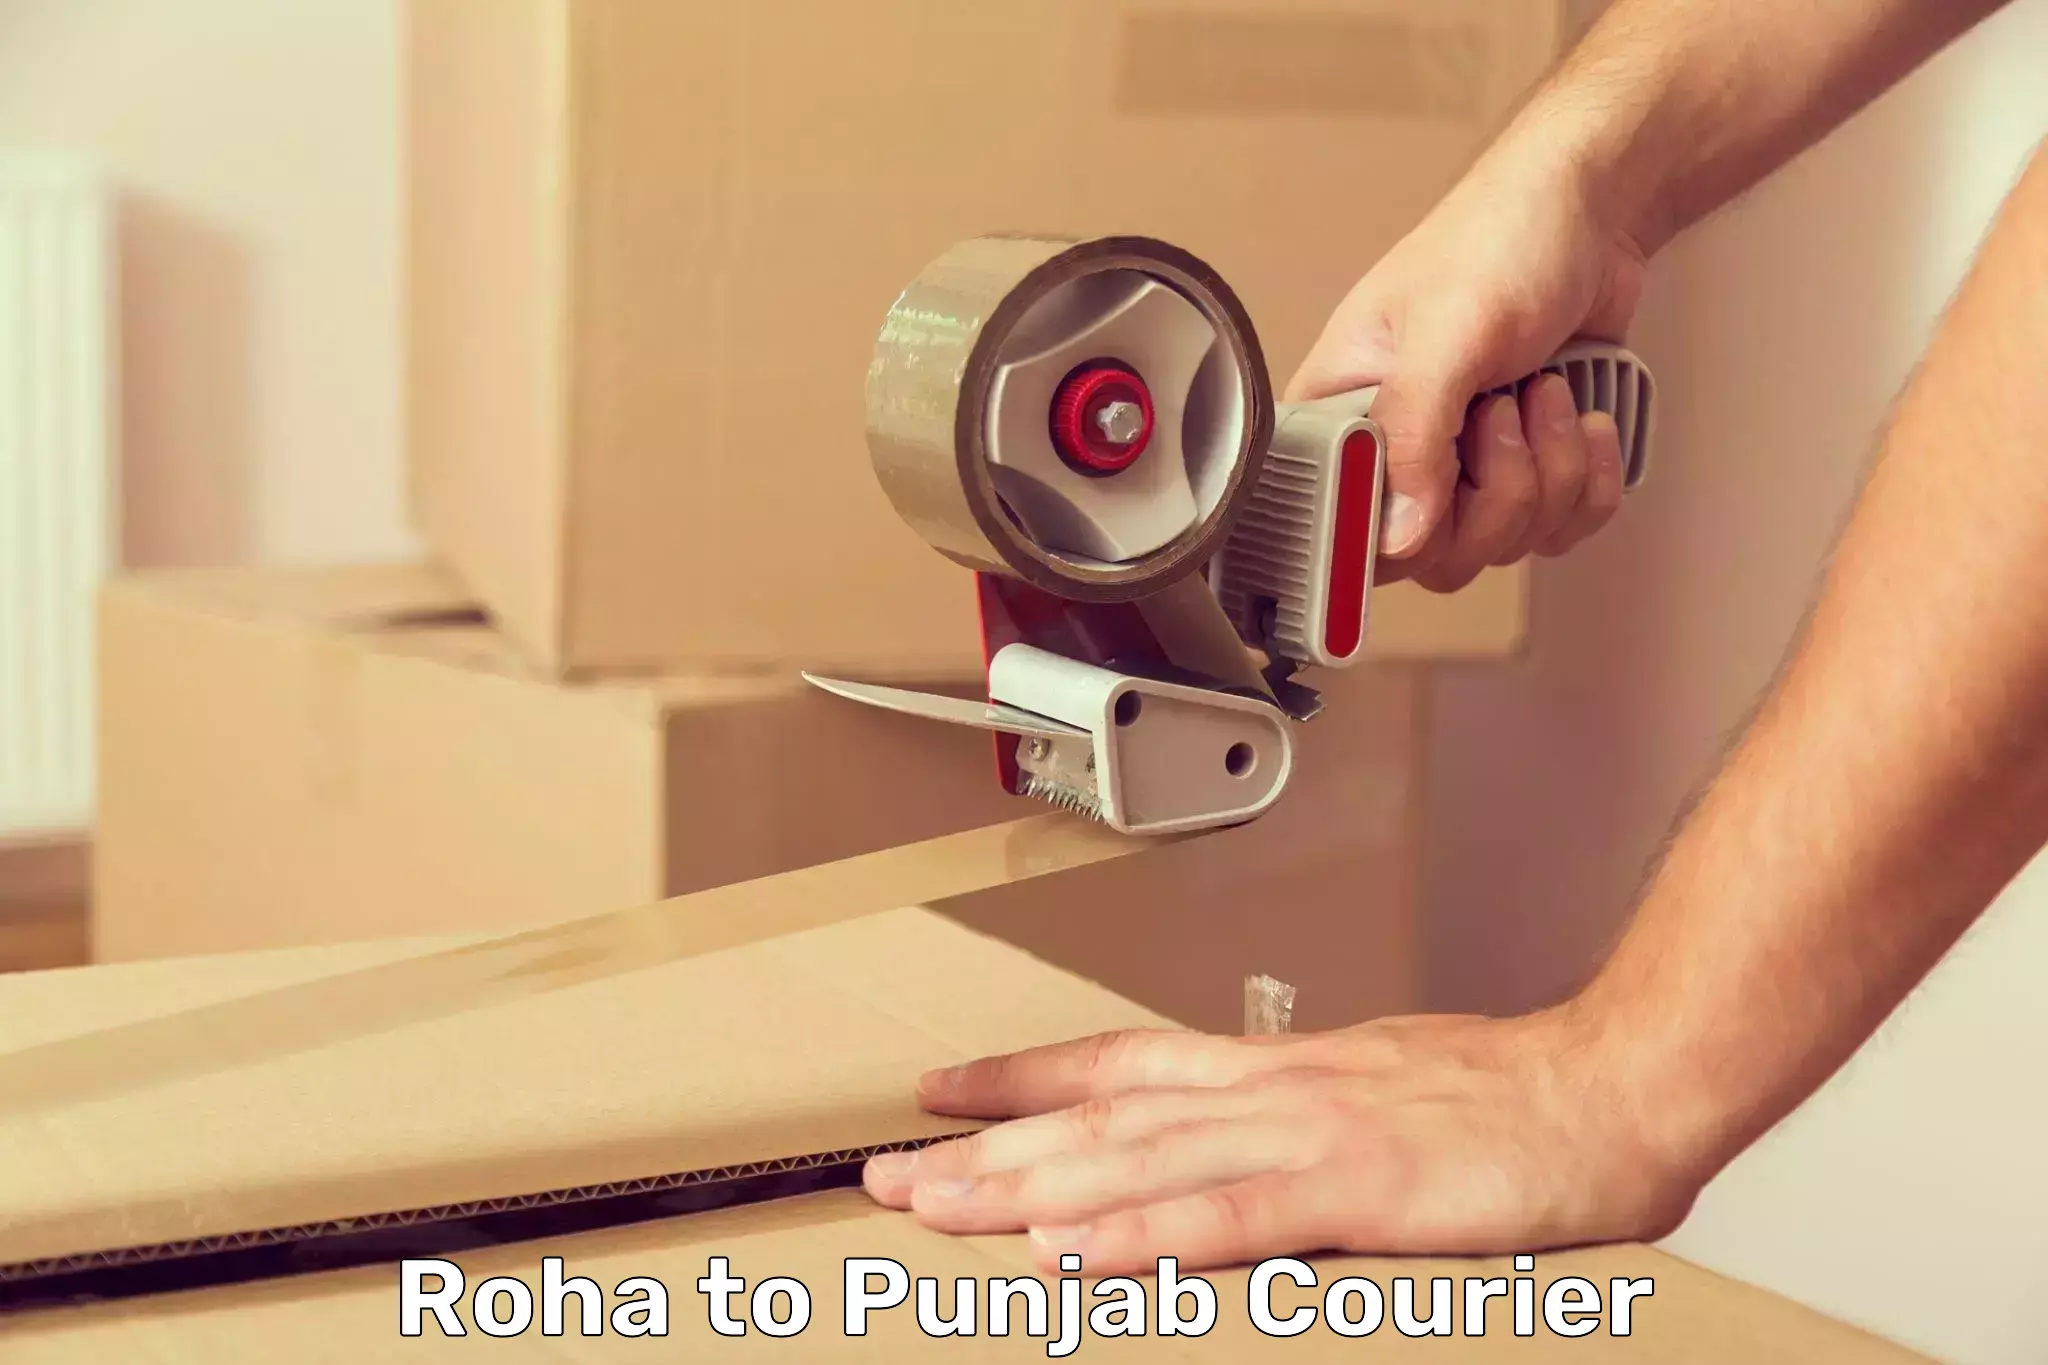 Cash on delivery service Roha to Punjab